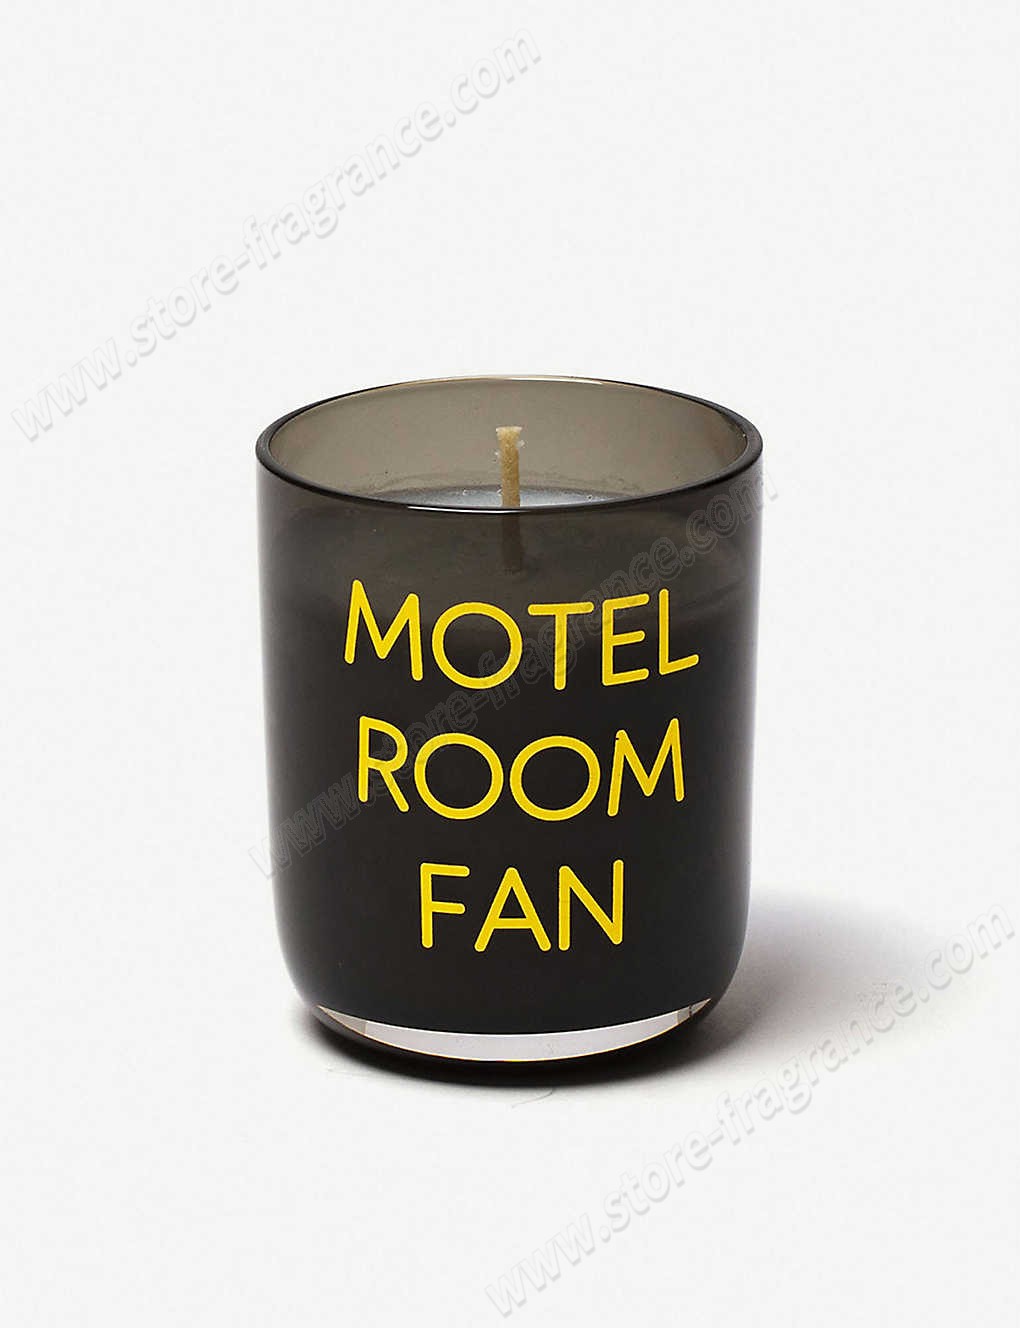 SELETTI/Memories Motel Room Fan scented candle 110g ✿ Discount Store - SELETTI/Memories Motel Room Fan scented candle 110g ✿ Discount Store